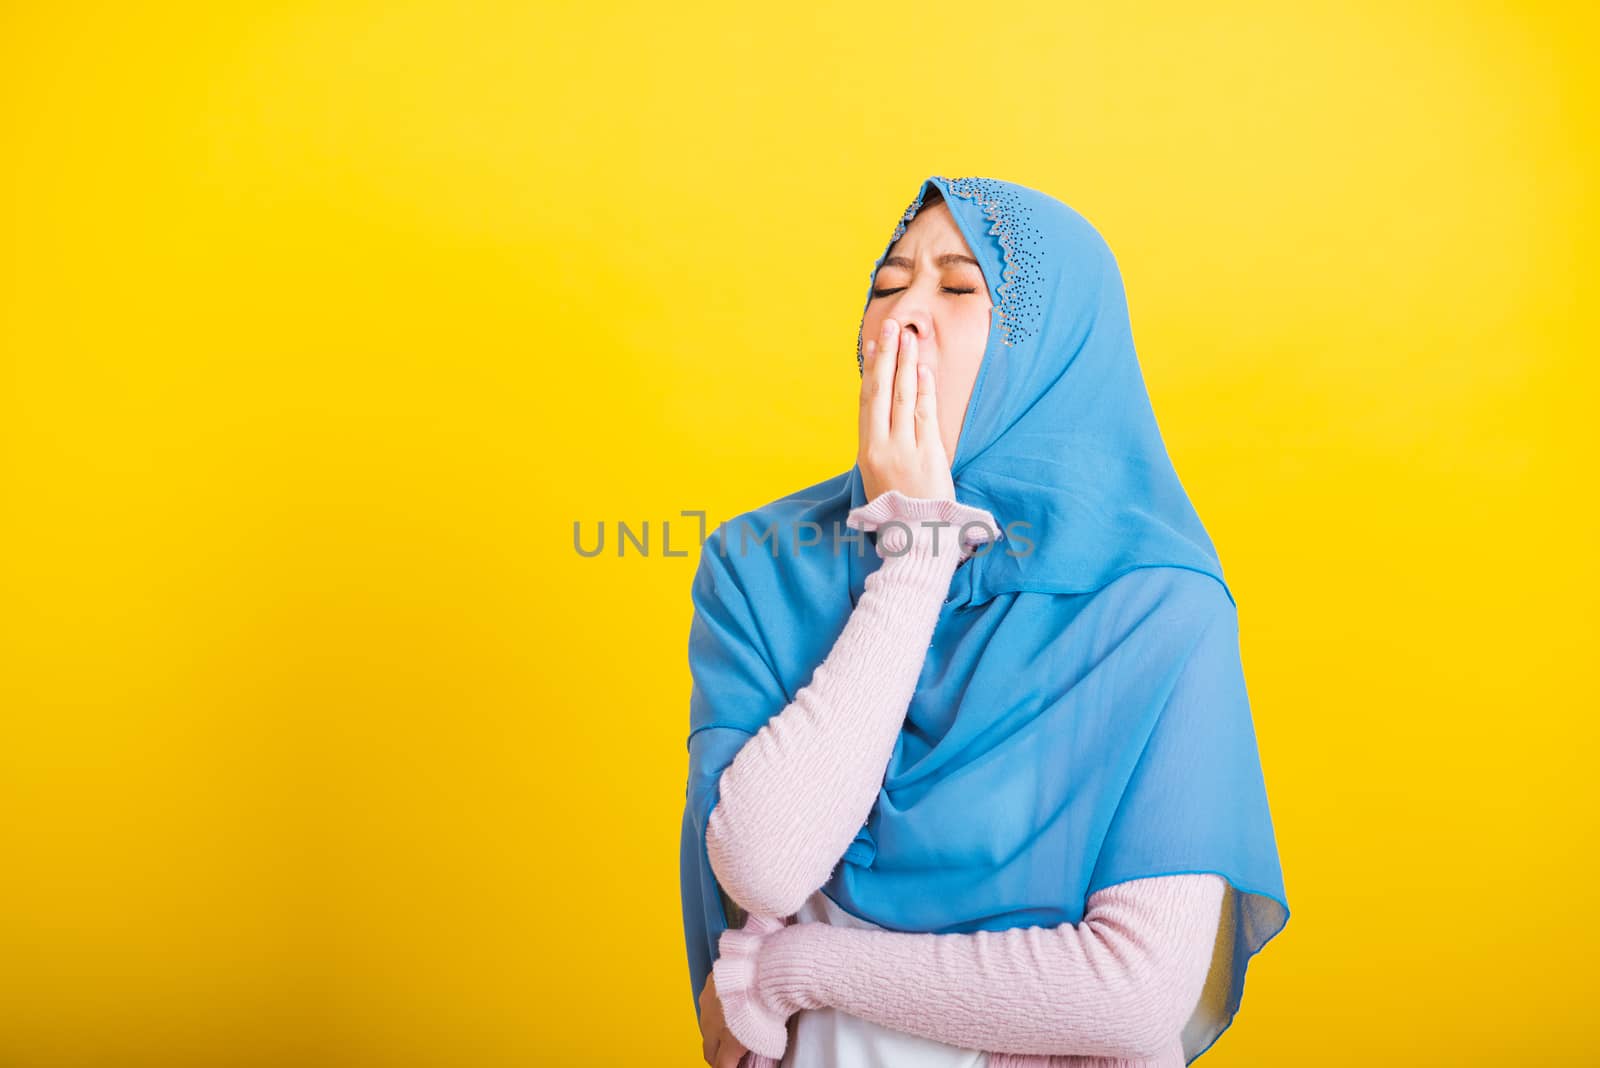 Asian Muslim Arab, Portrait of happy beautiful young woman Islam religious wear veil hijab funny she sleepy yawning wide open mouth hand cover mouth eyes closed studio shot isolated yellow background